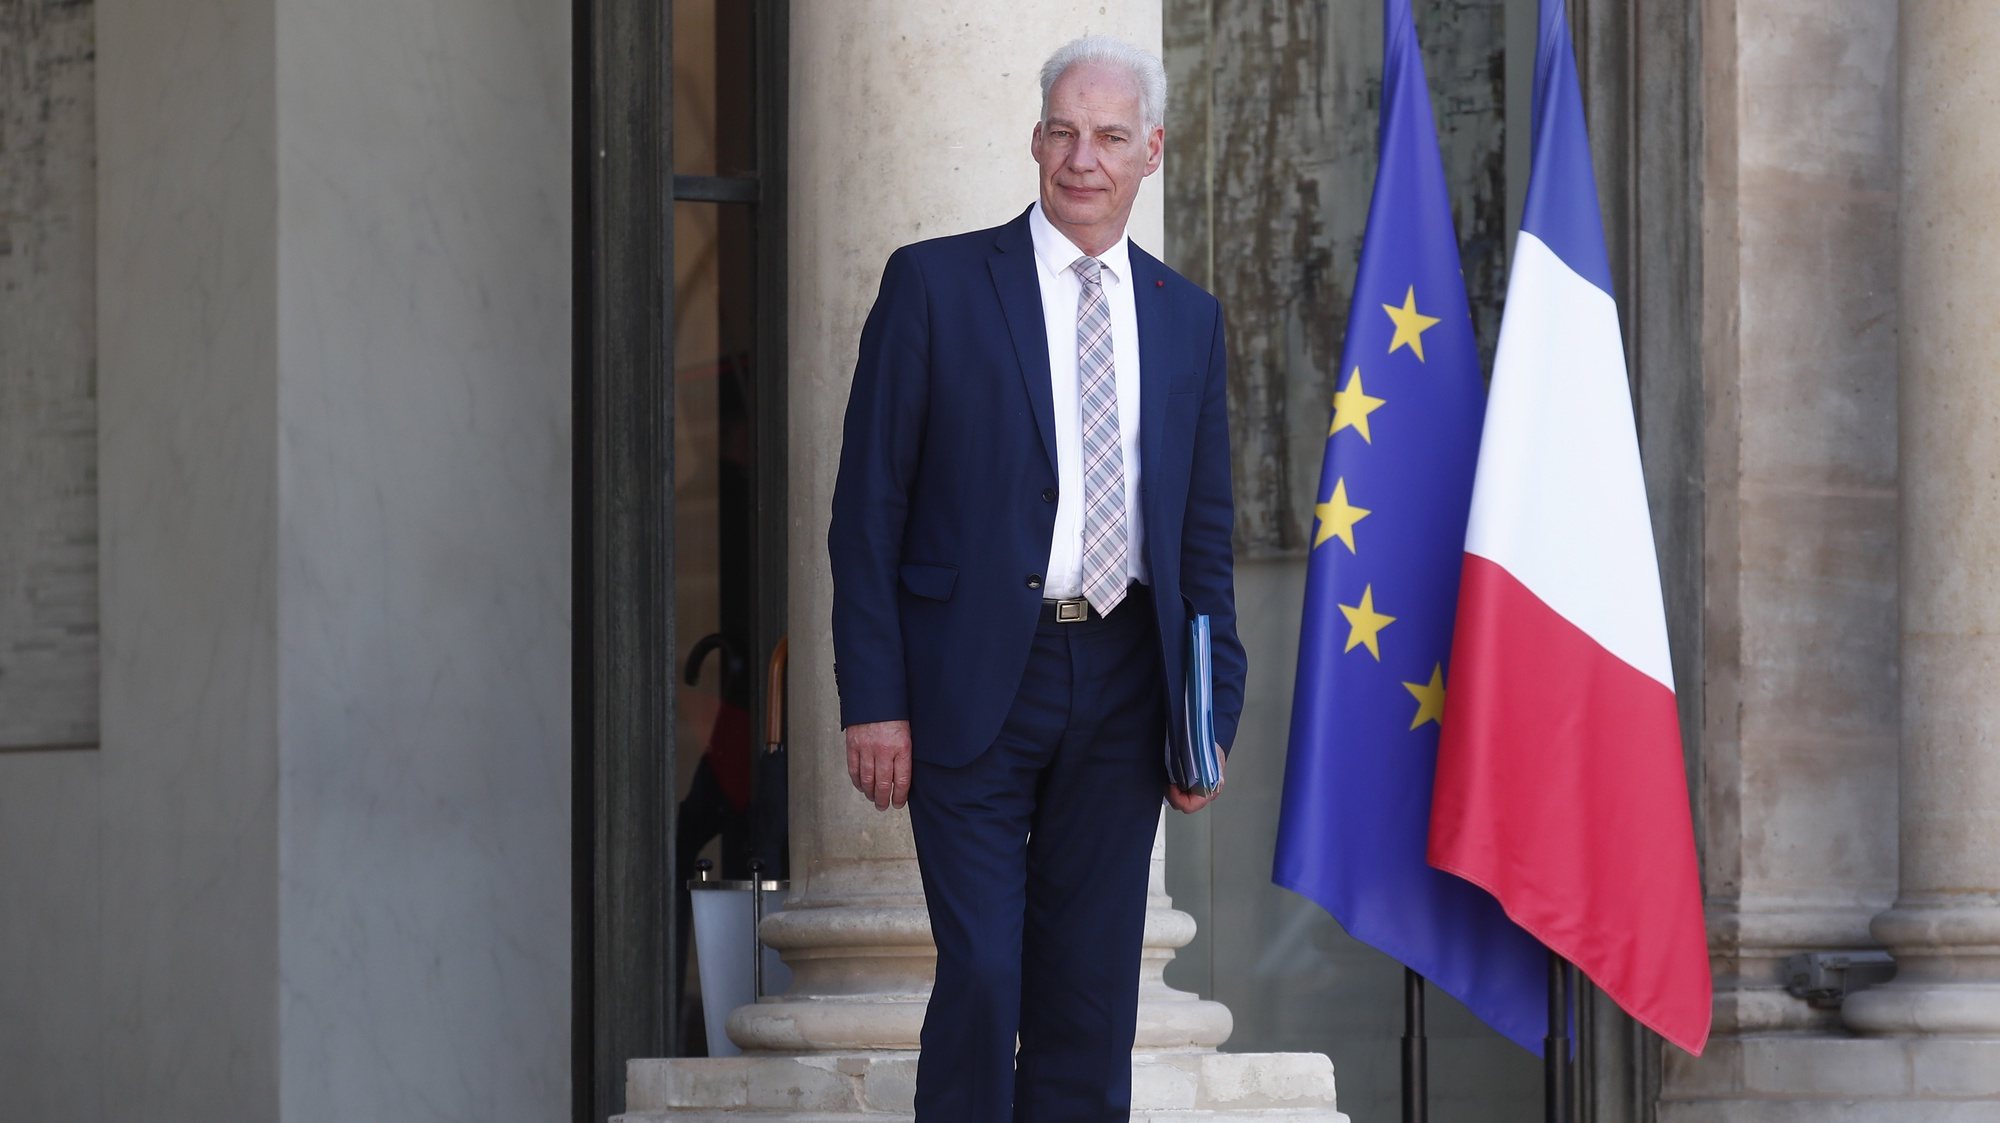 epa08532760 French Junior Minister for Small and Medium Entreprises Alain Griset leaves the Elysee Palace after the first minister council cabinet meeting of the new cabinet after a government reshuffle,  in Paris, France, 07 July 2020. The government of Edouard Philippe had resigned on 03 July 2020, prompting a government and cabinet reshuffle.  EPA/IAN LANGSDON